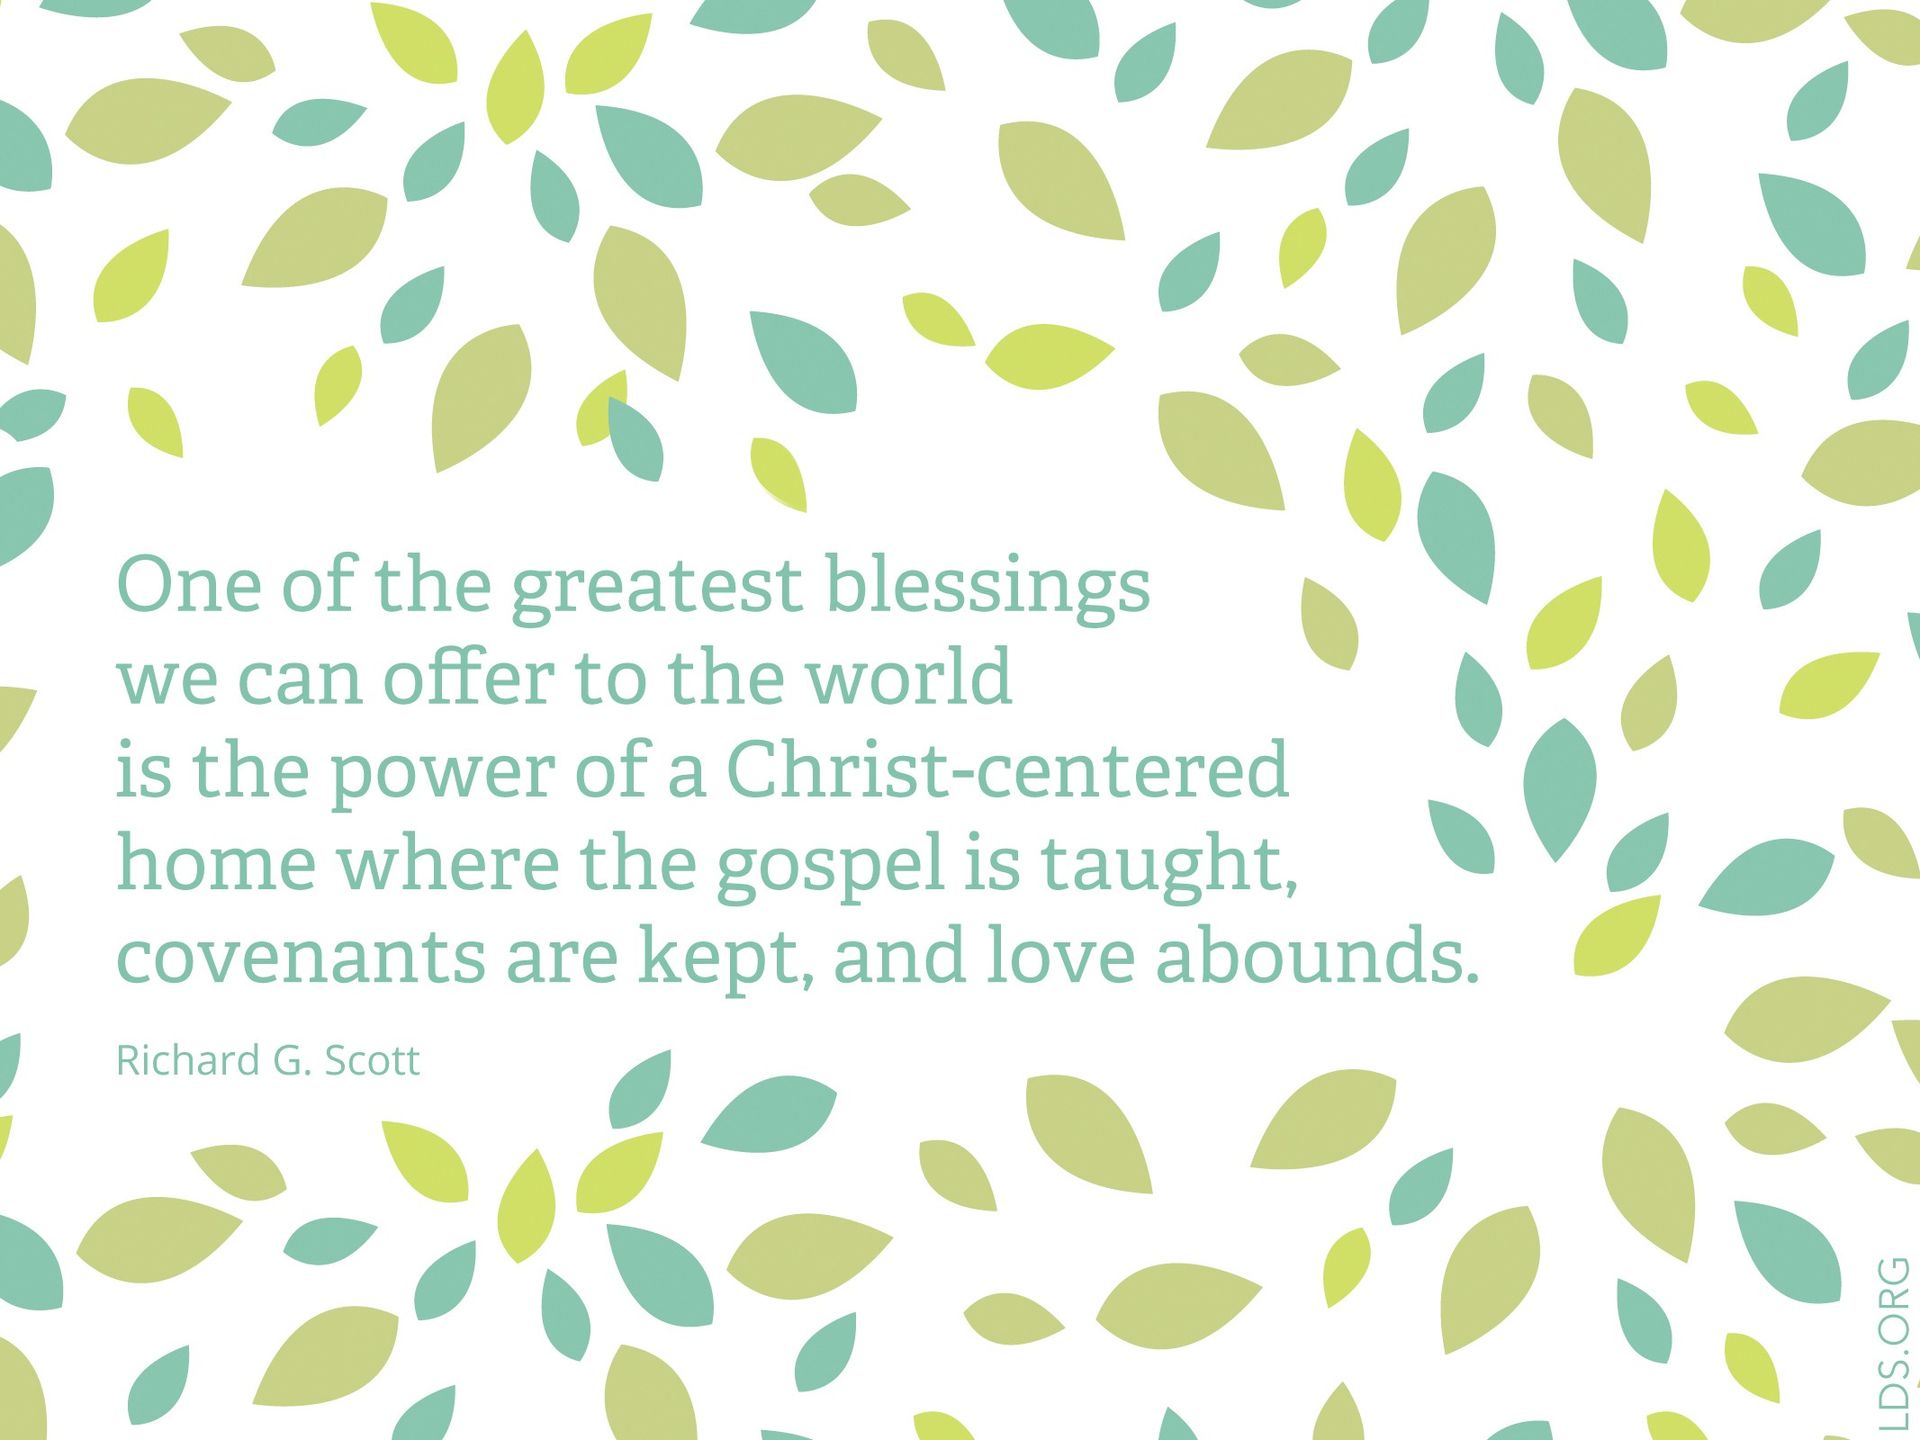 “One of the greatest blessings we can offer to the world is the power of a Christ-centered home where the gospel is taught, covenants are kept, and love abounds.” —Elder Richard G. Scott, “For Peace at Home”